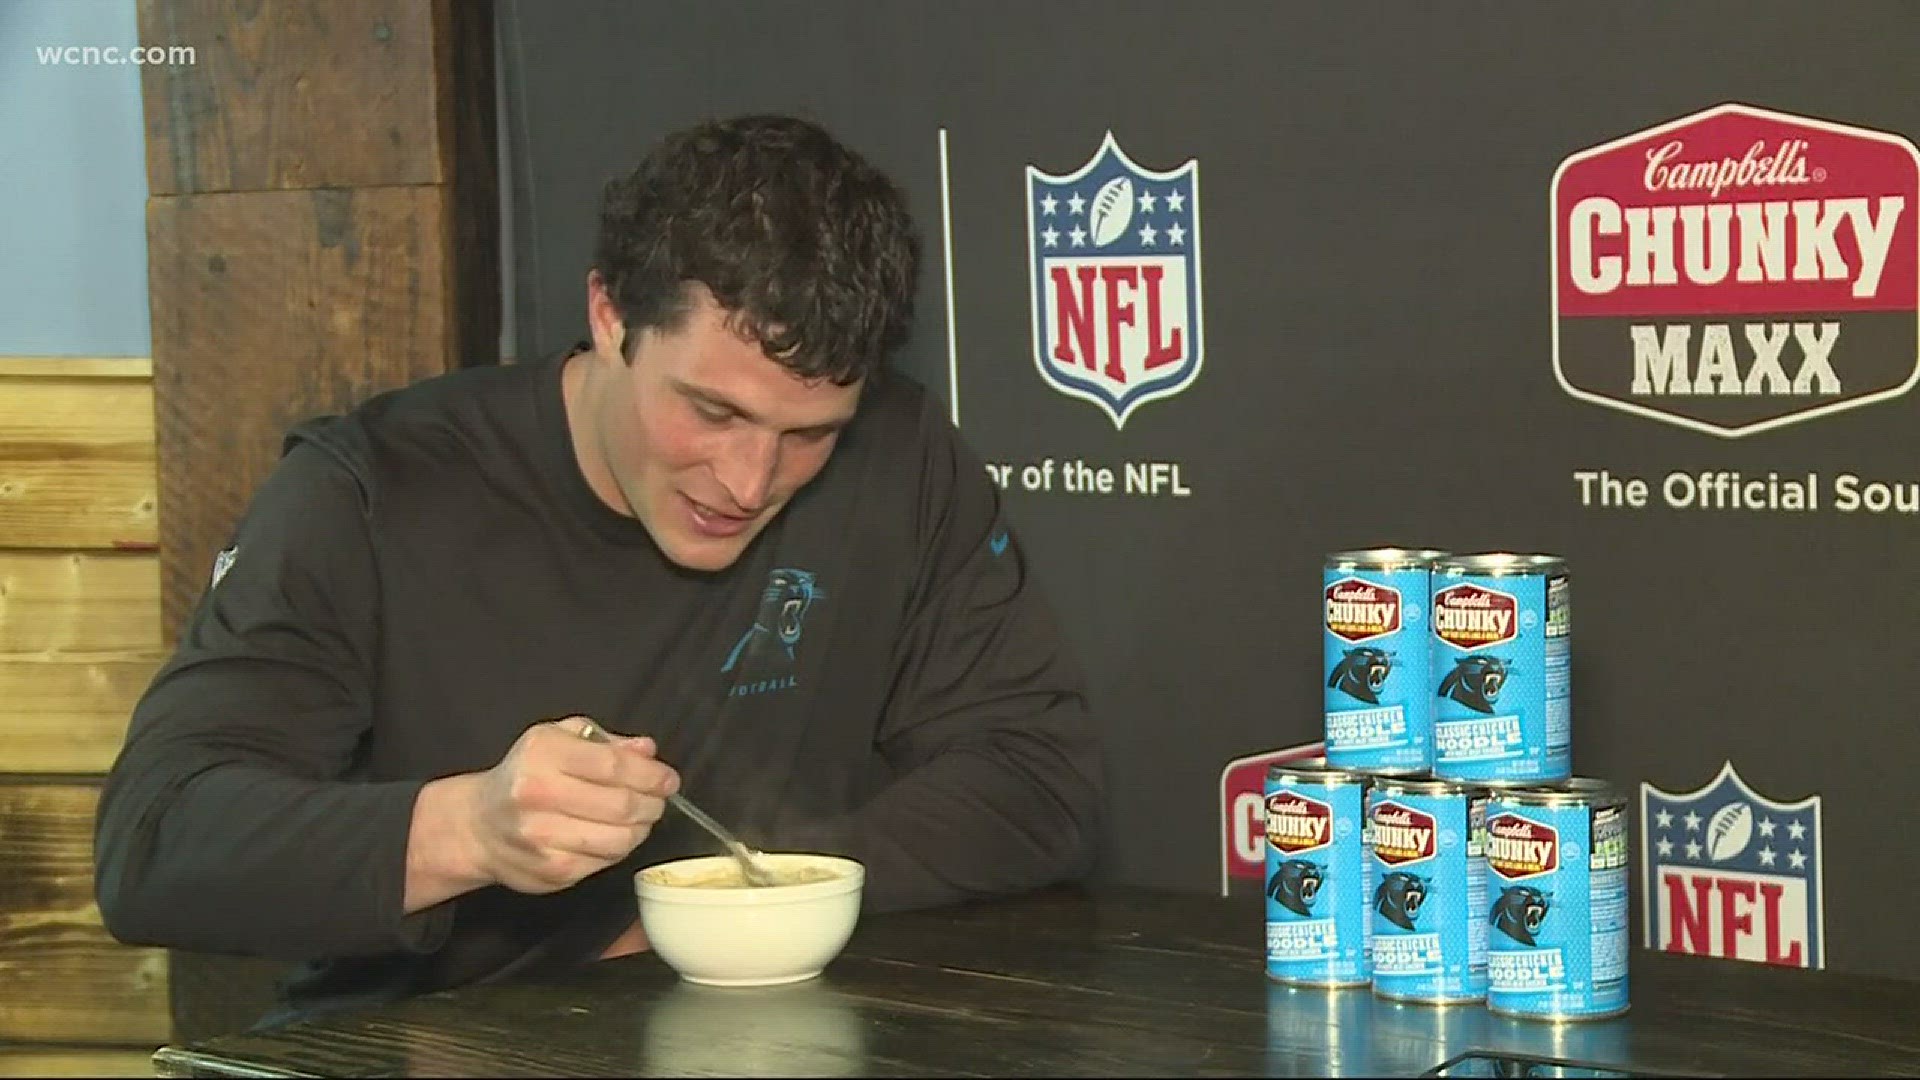 This season, Kuechly signed on as a national spokesman for Campbell's Soup.